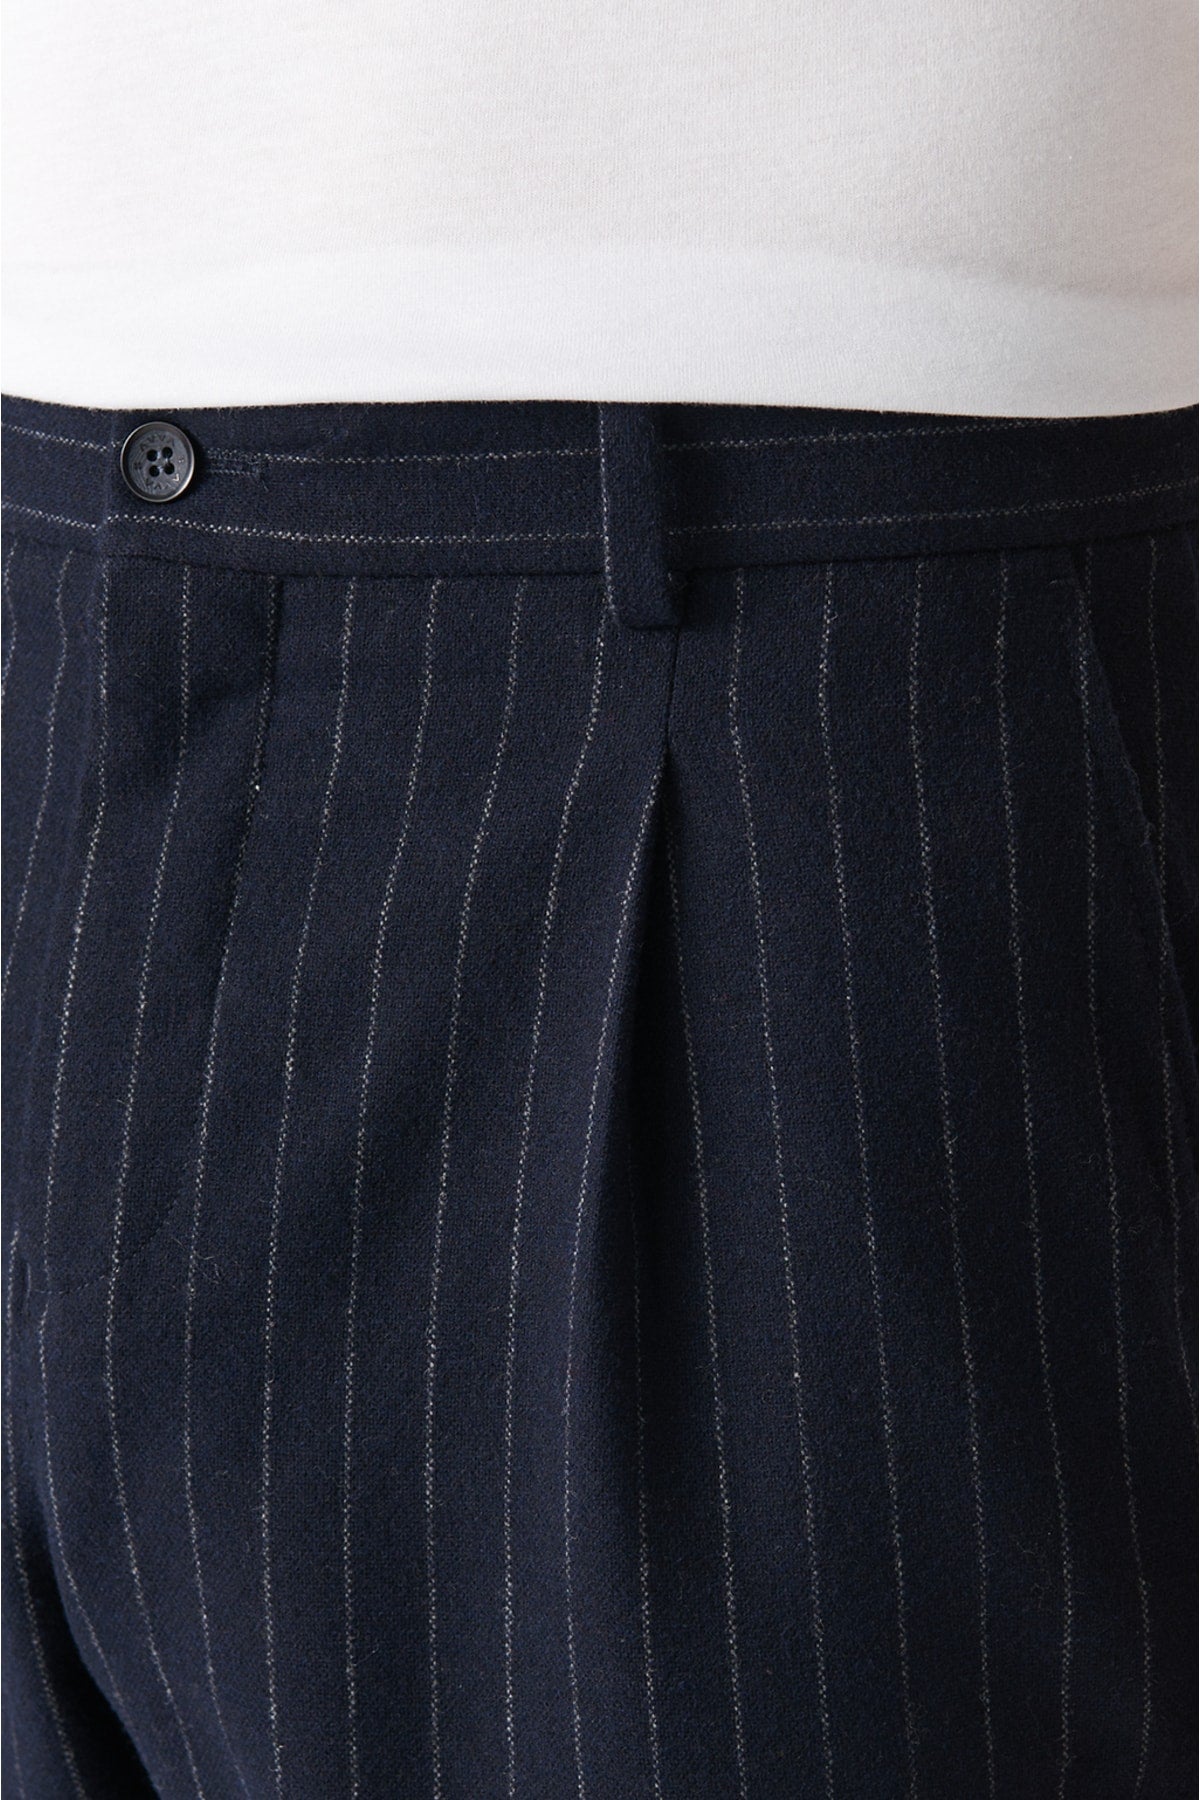 Navy blue woolen pleated striped relaxed fit suit pants